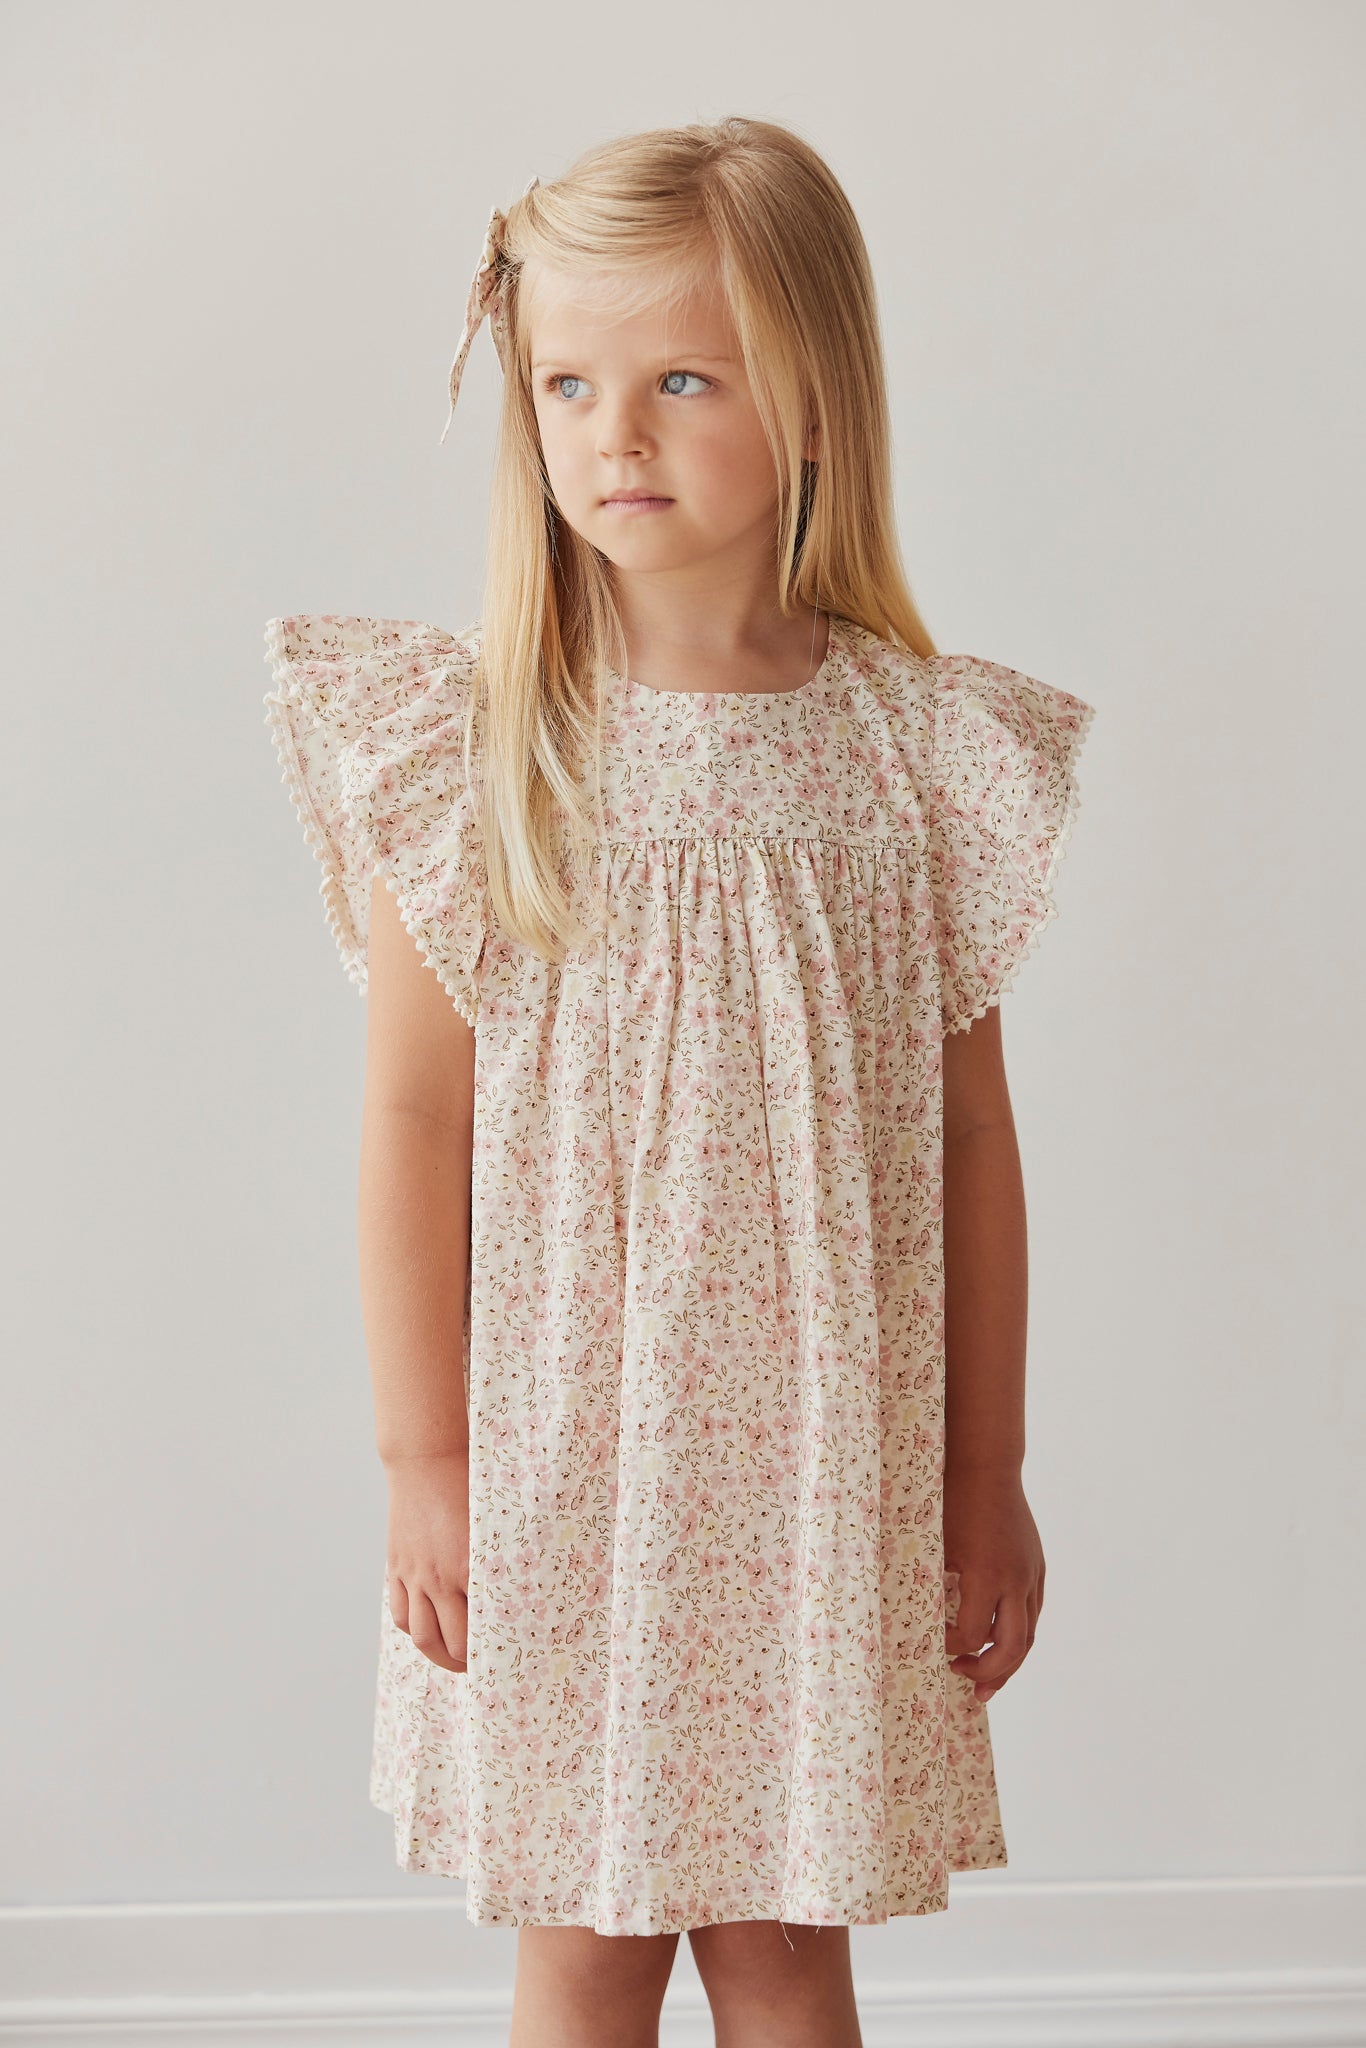 Organic Cotton Eleanor Dress - Fifi Floral (Almost Gone)